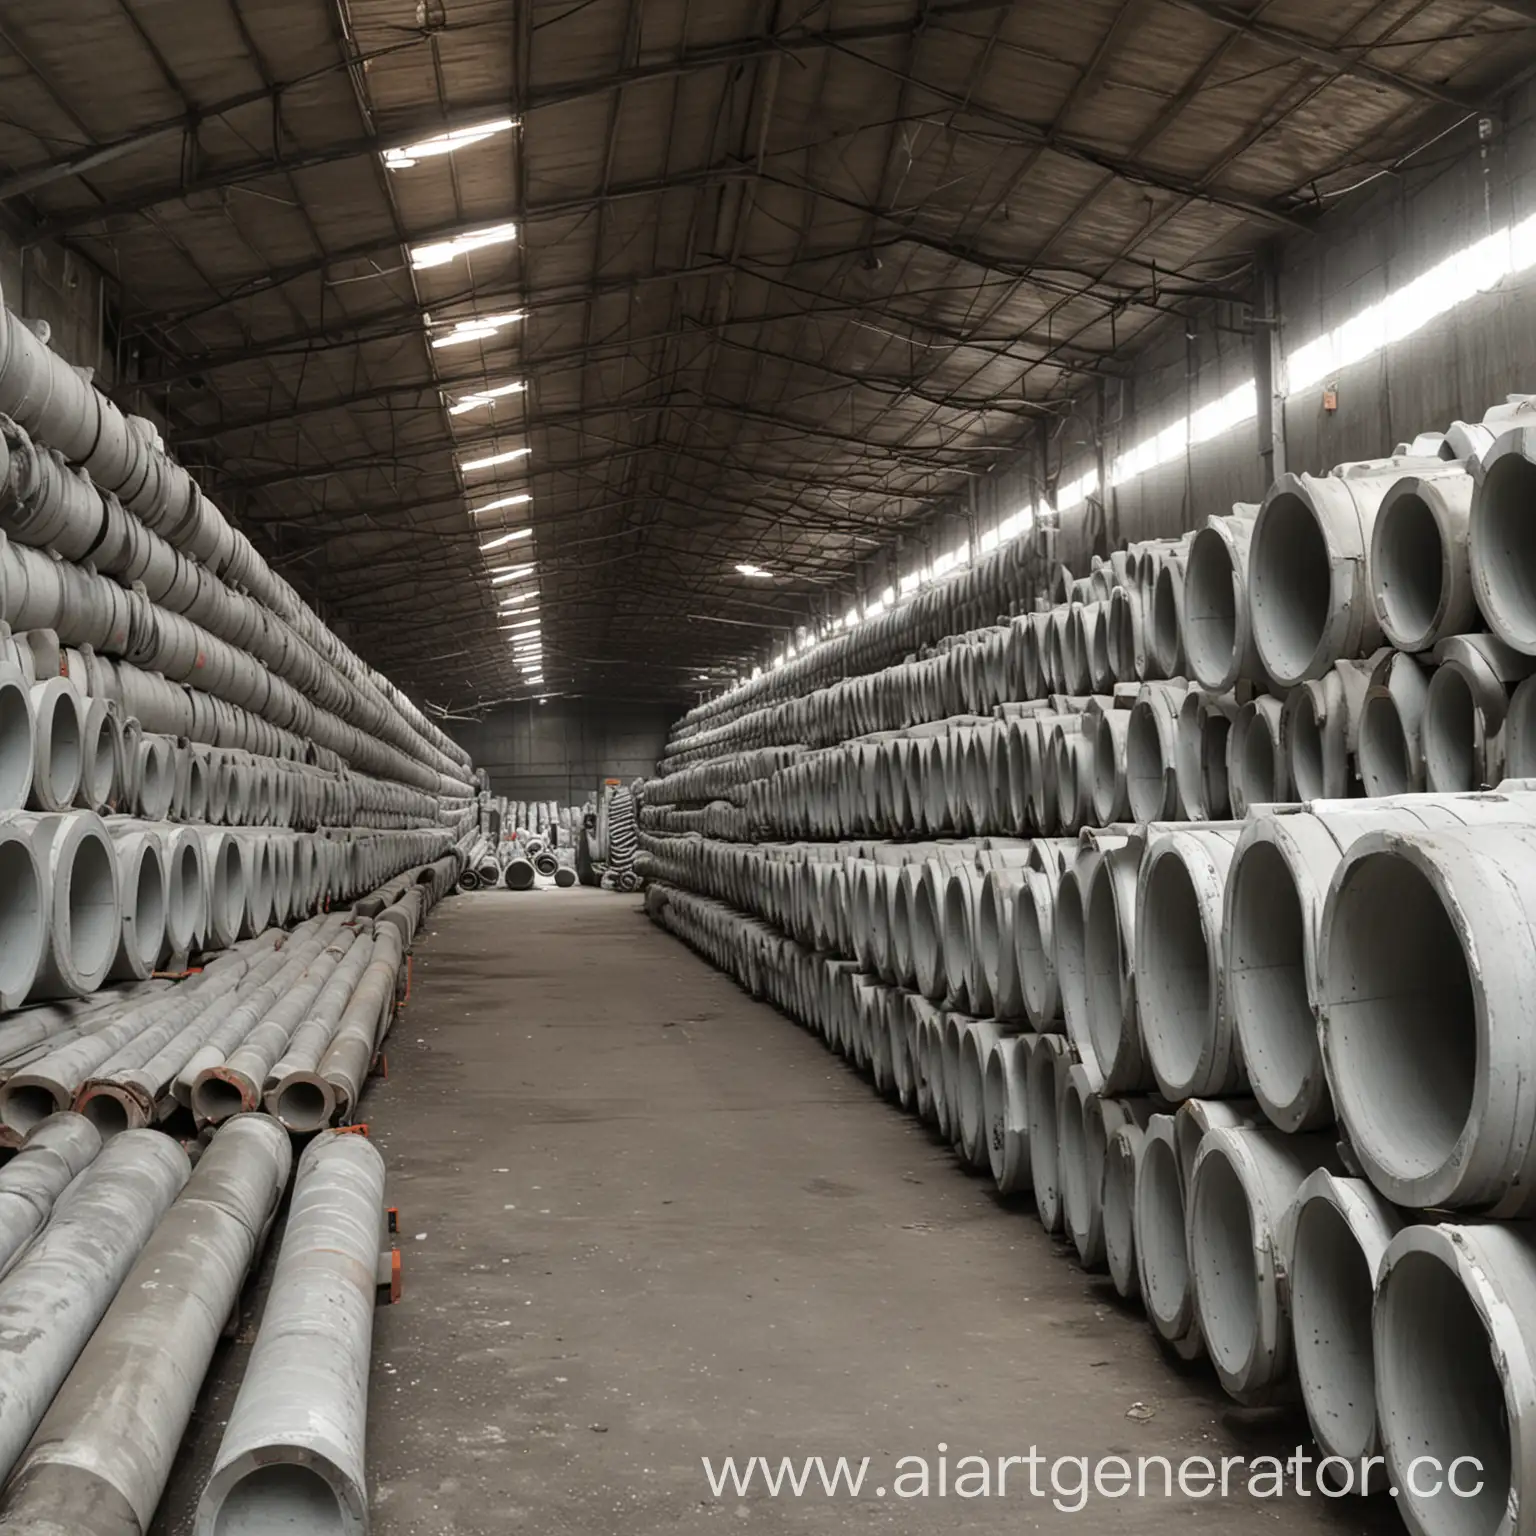 Industrial-Warehouse-of-Reinforced-Concrete-Pipes-Massive-Storage-Facility